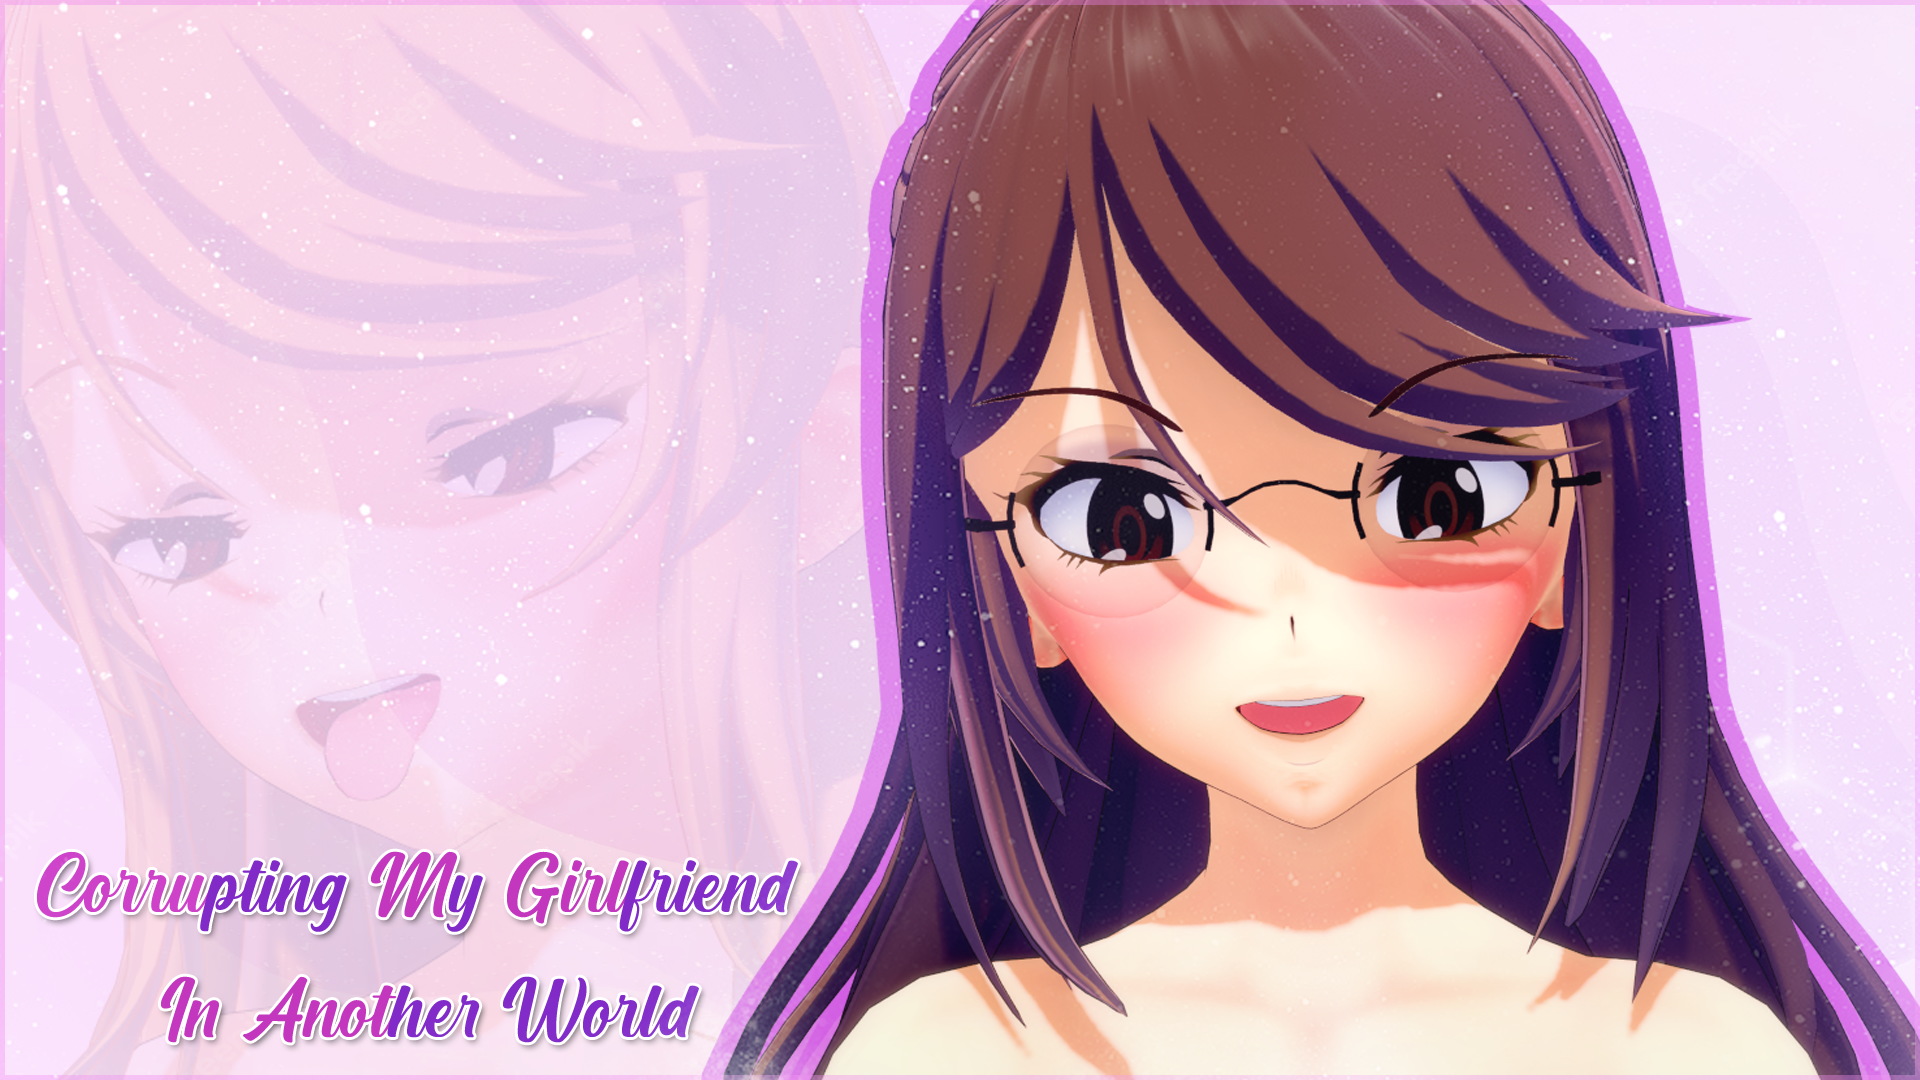 Download Free Hentai Game Porn Games Corrupting My Girlfriend in Another World (v0.2.2) Adult Picture